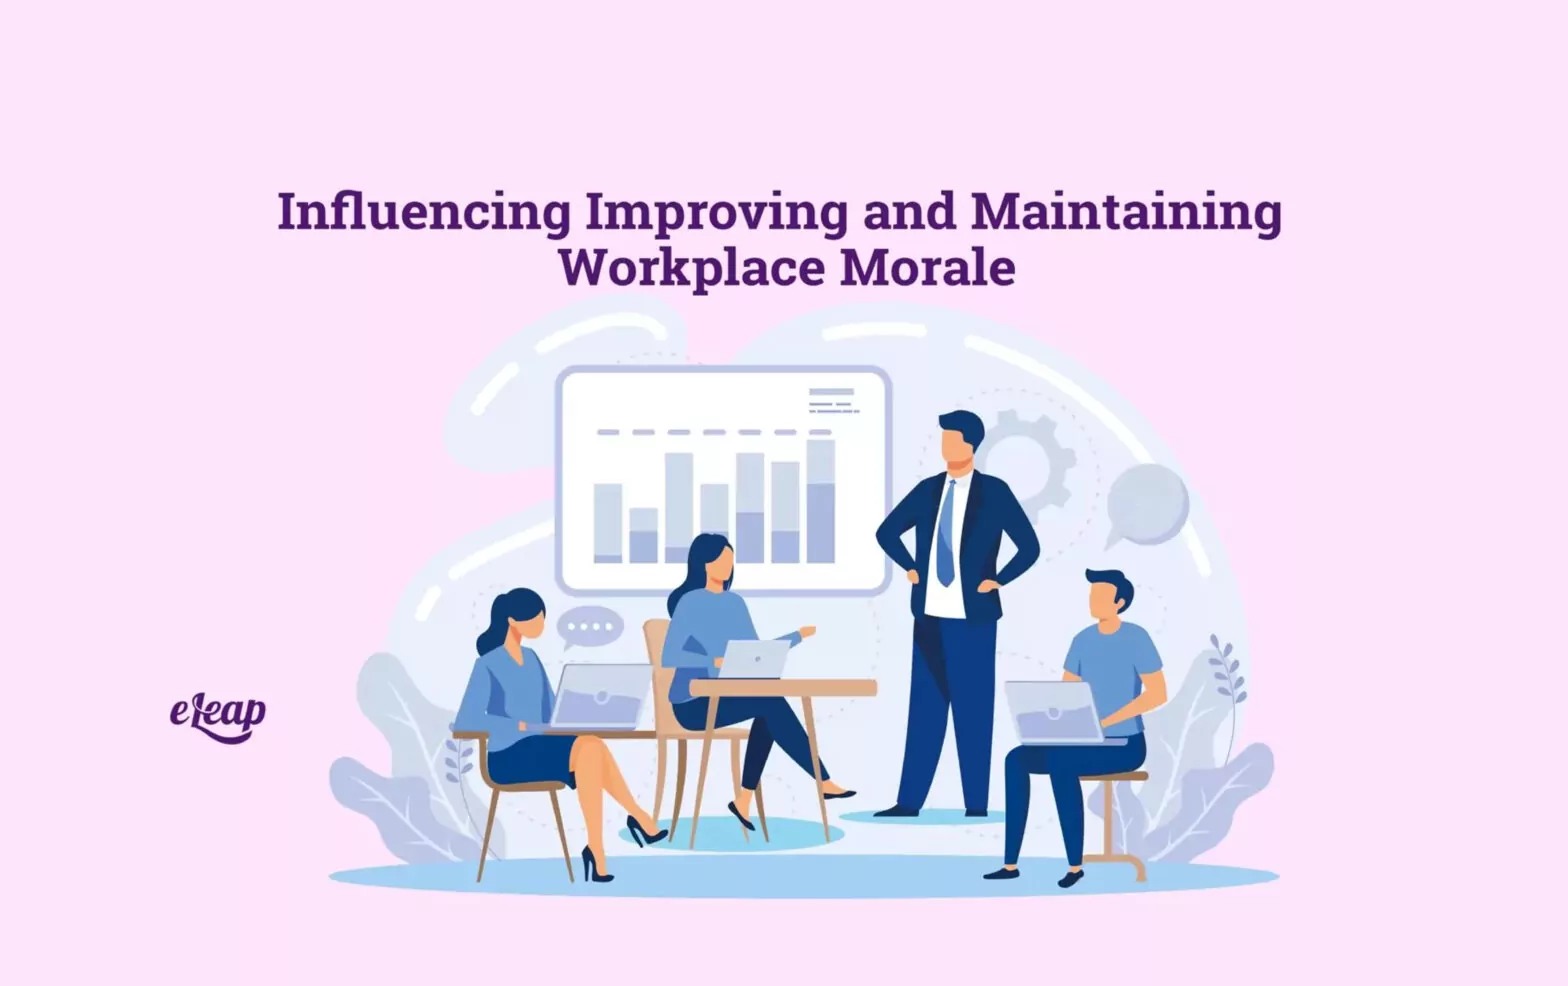 Influencing Improving and Maintaining Workplace Morale